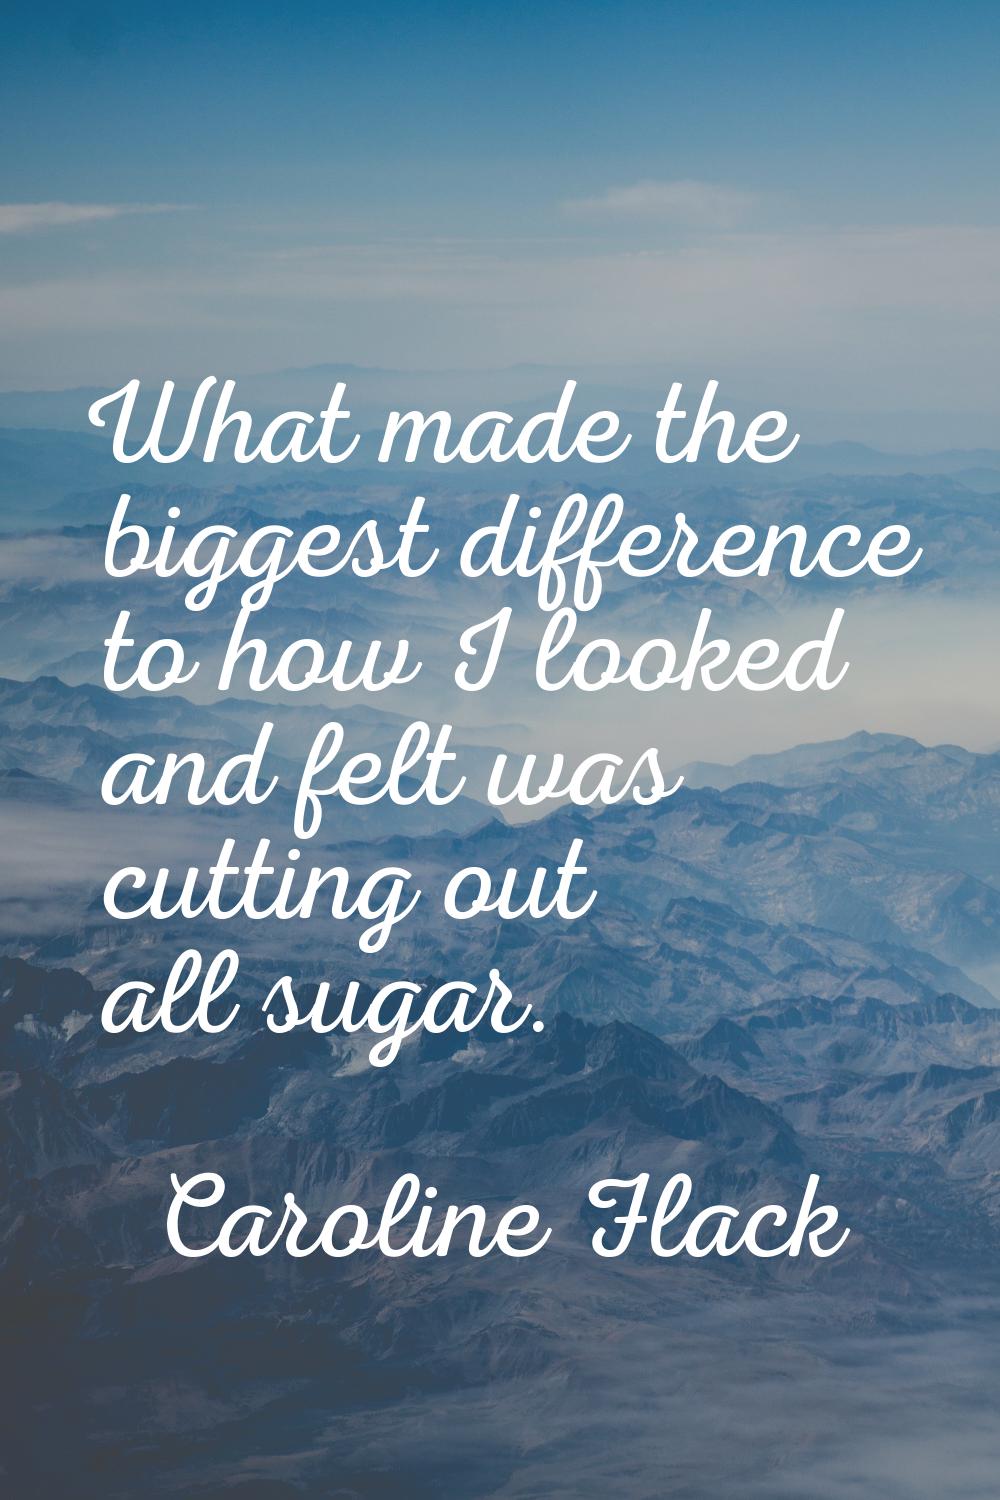 What made the biggest difference to how I looked and felt was cutting out all sugar.